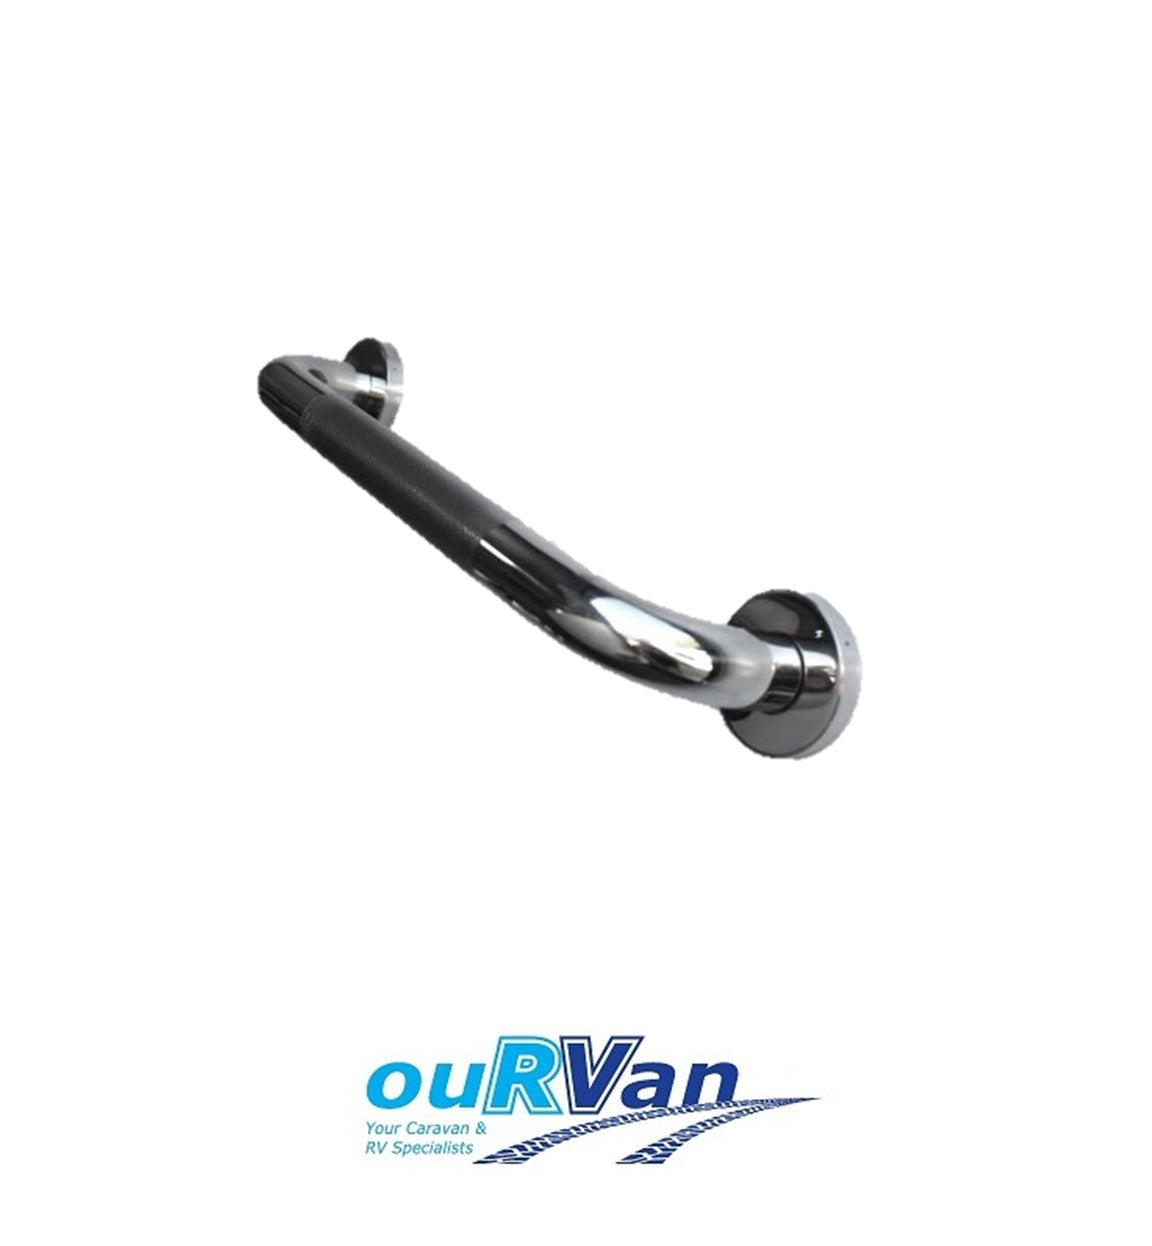 200mm Knurled Stainless Steel Grab Bar – Gb302g